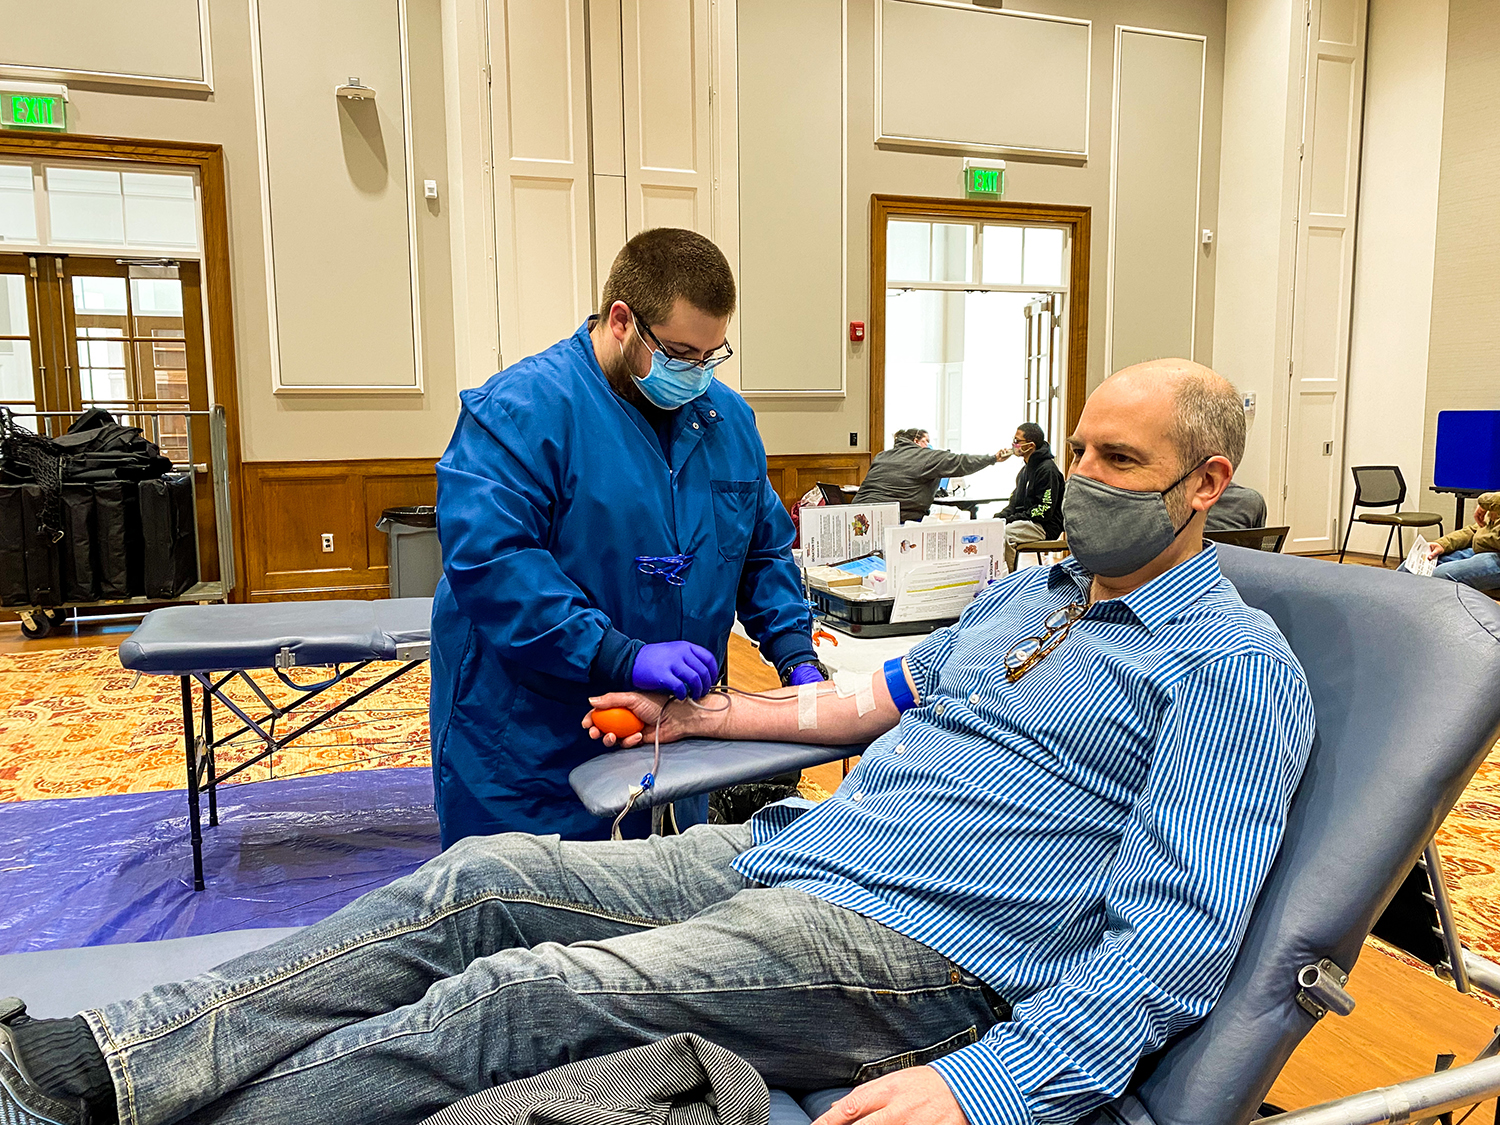 Transylvania community answers call to service at campus blood drive today